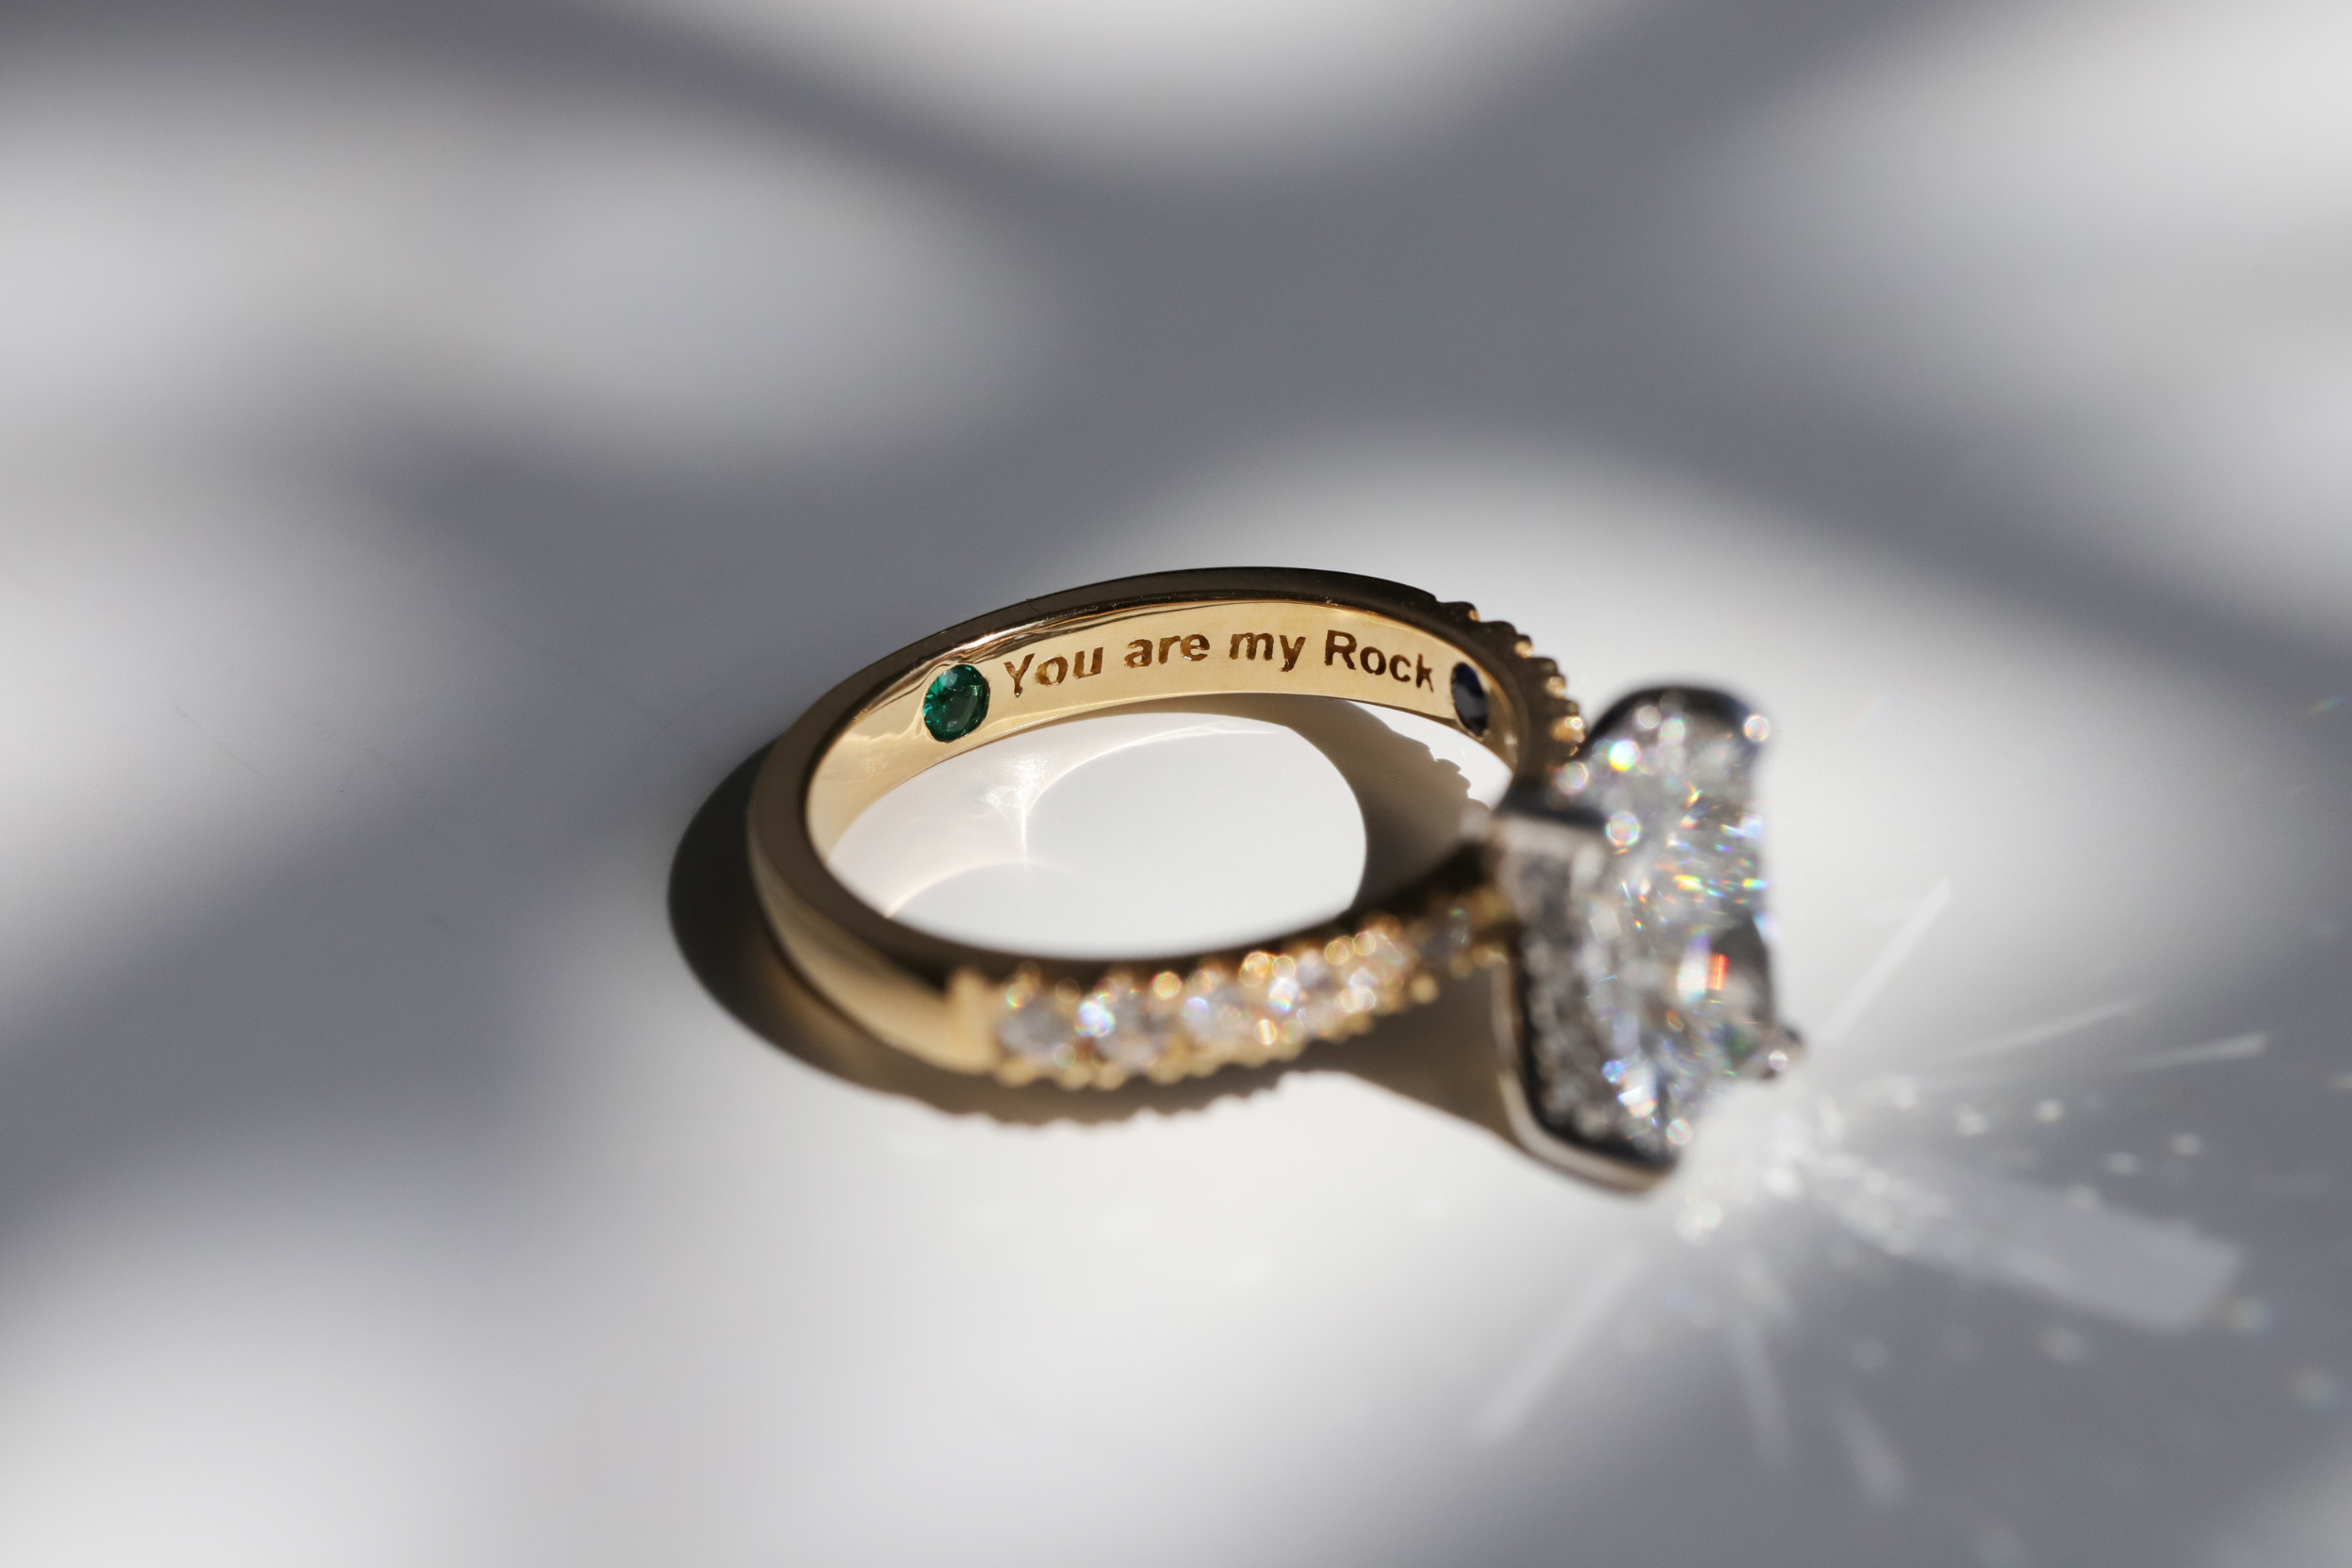 Signet Rings - Engraved & Personalized | Deakin & Francis